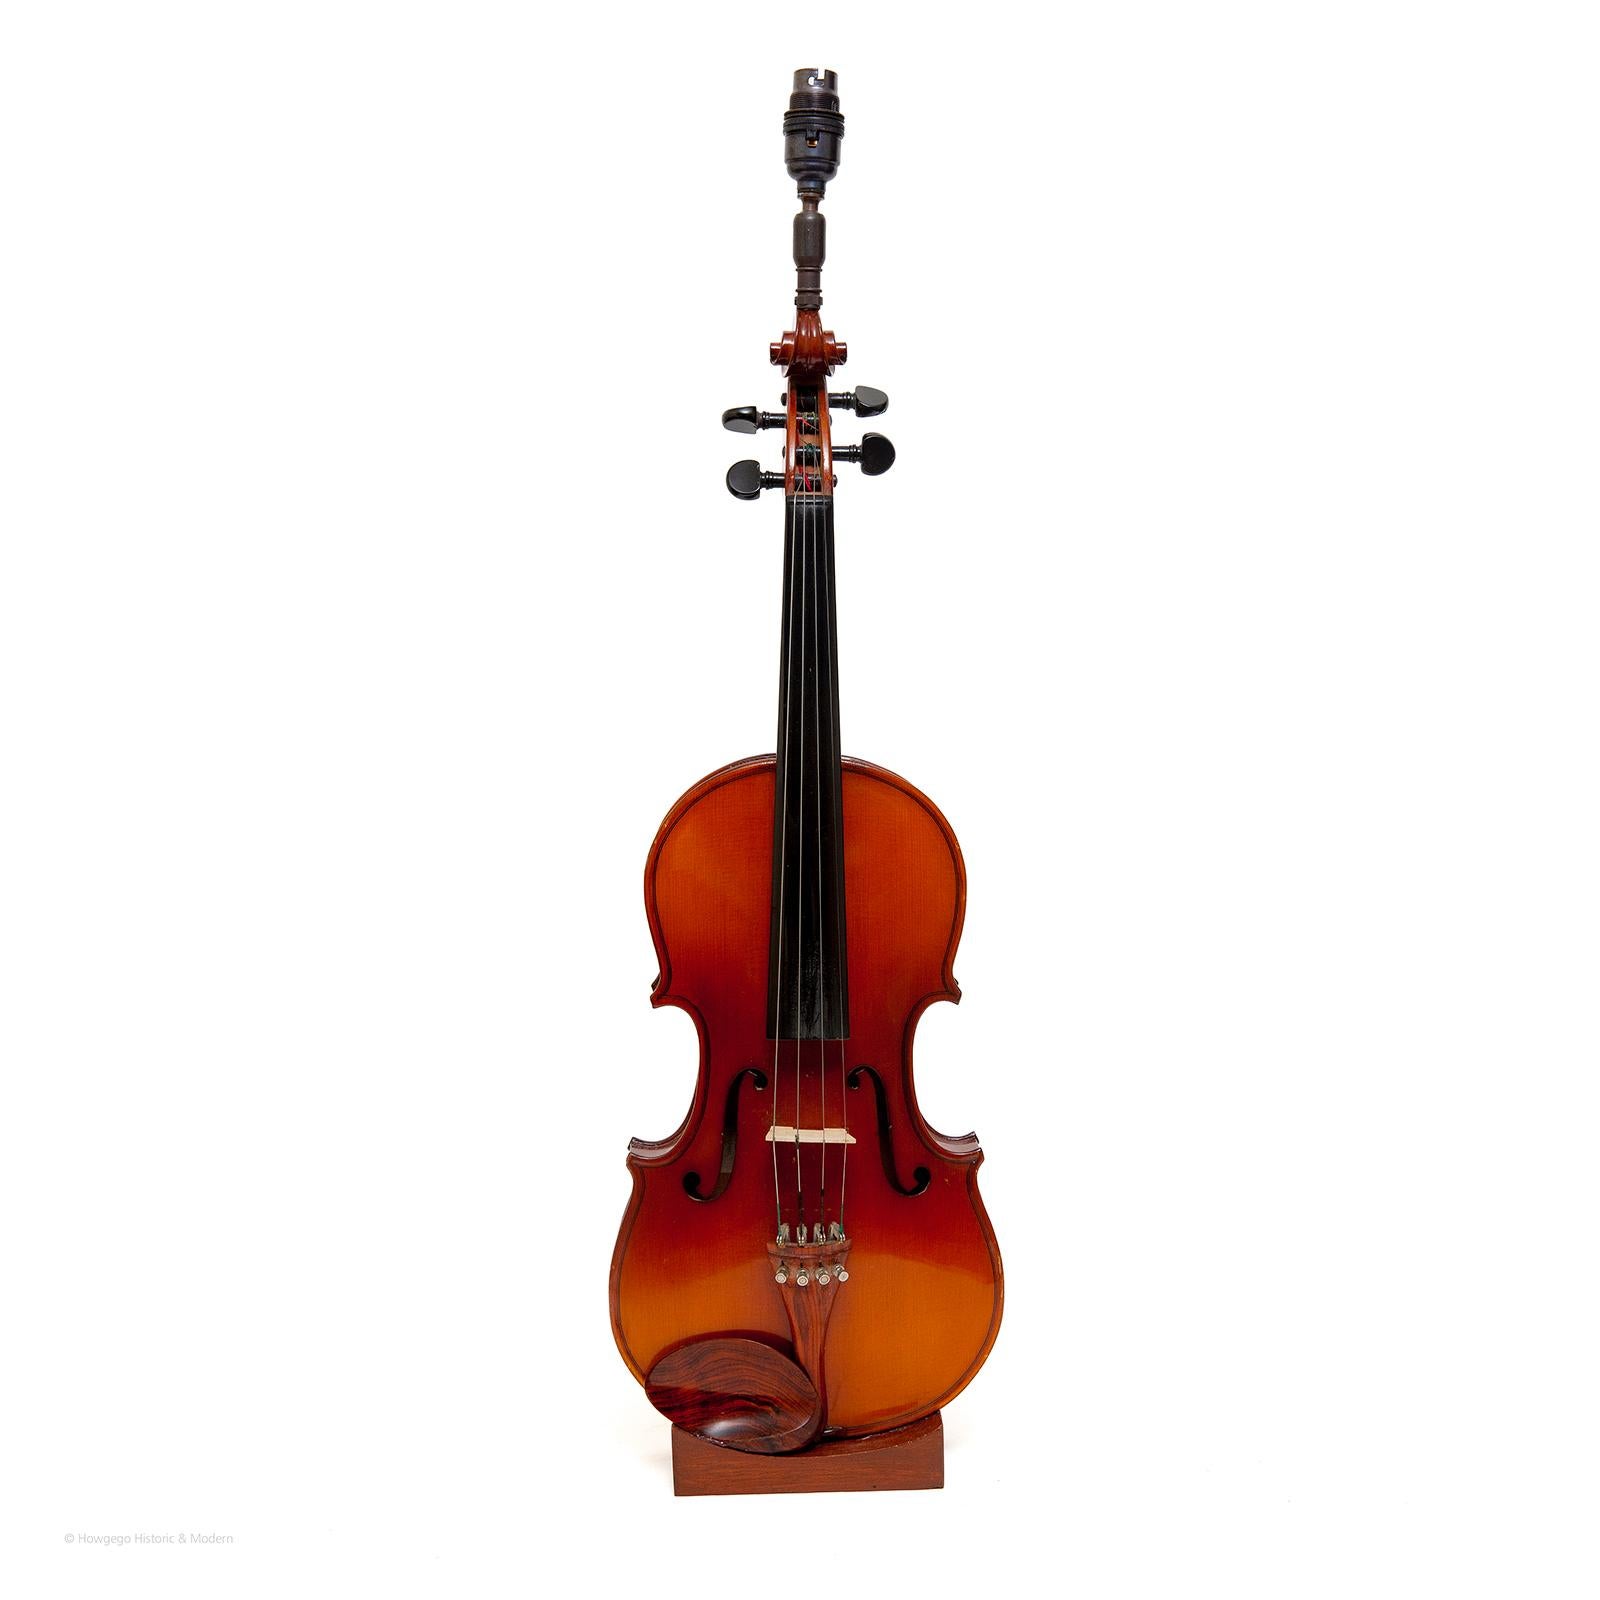 Vintage, violin upcycled into a table lamp, 29” high.
A fun piece of signature and conversation mood lighting which can also be played.
Injecting character and atmospheric into the interior.
PRICING £1,500.
Inspired by violins made by Ludwig